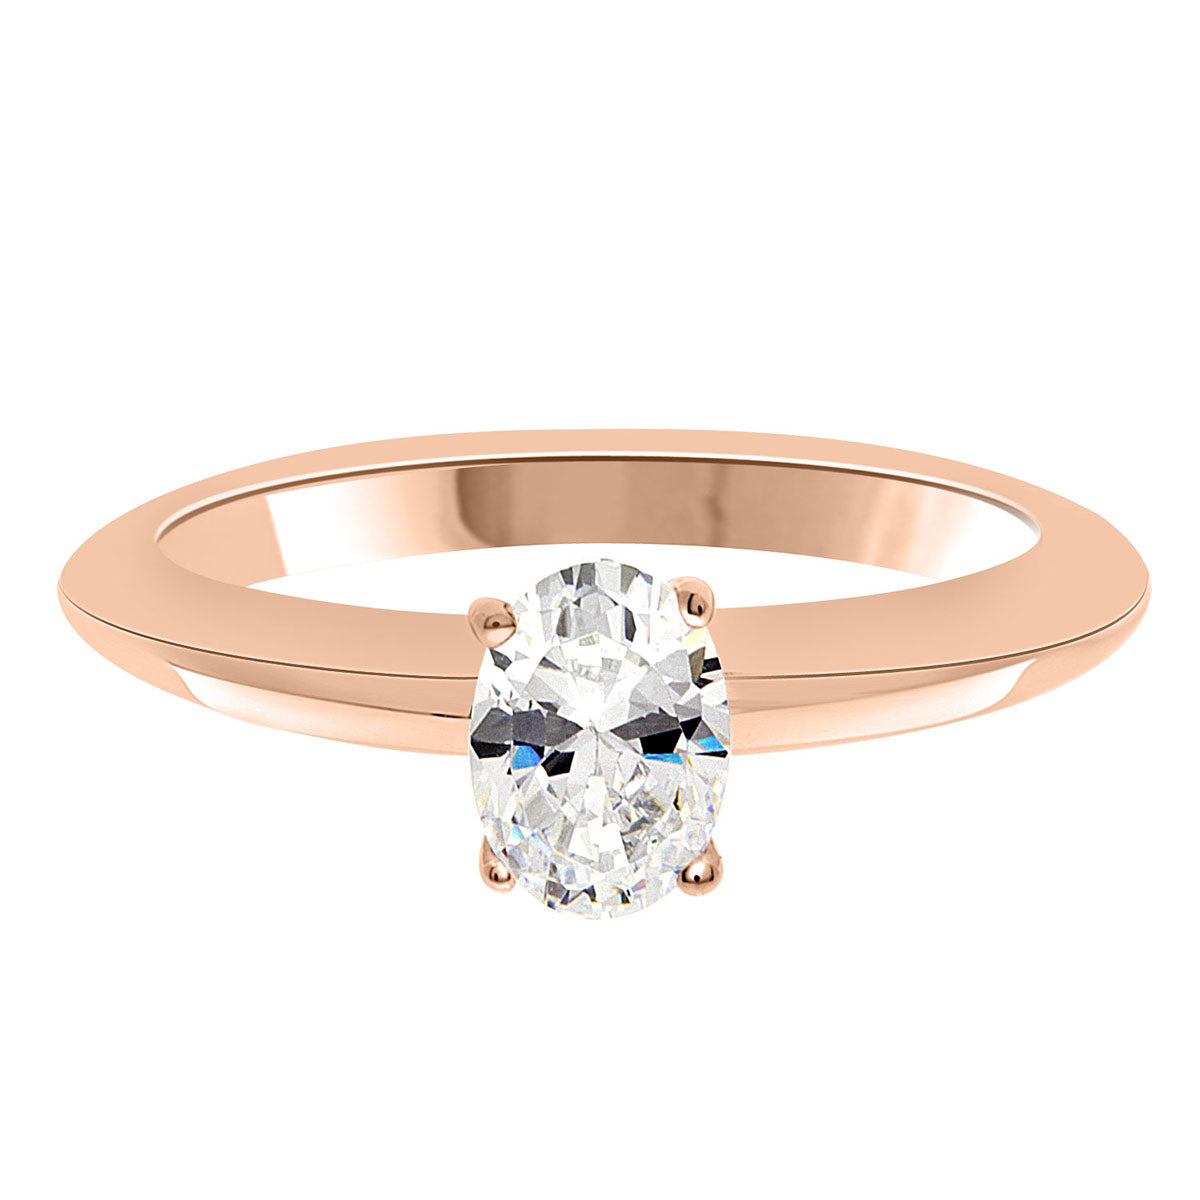 Knife Edge Band Engagement Ring in rose gold metal